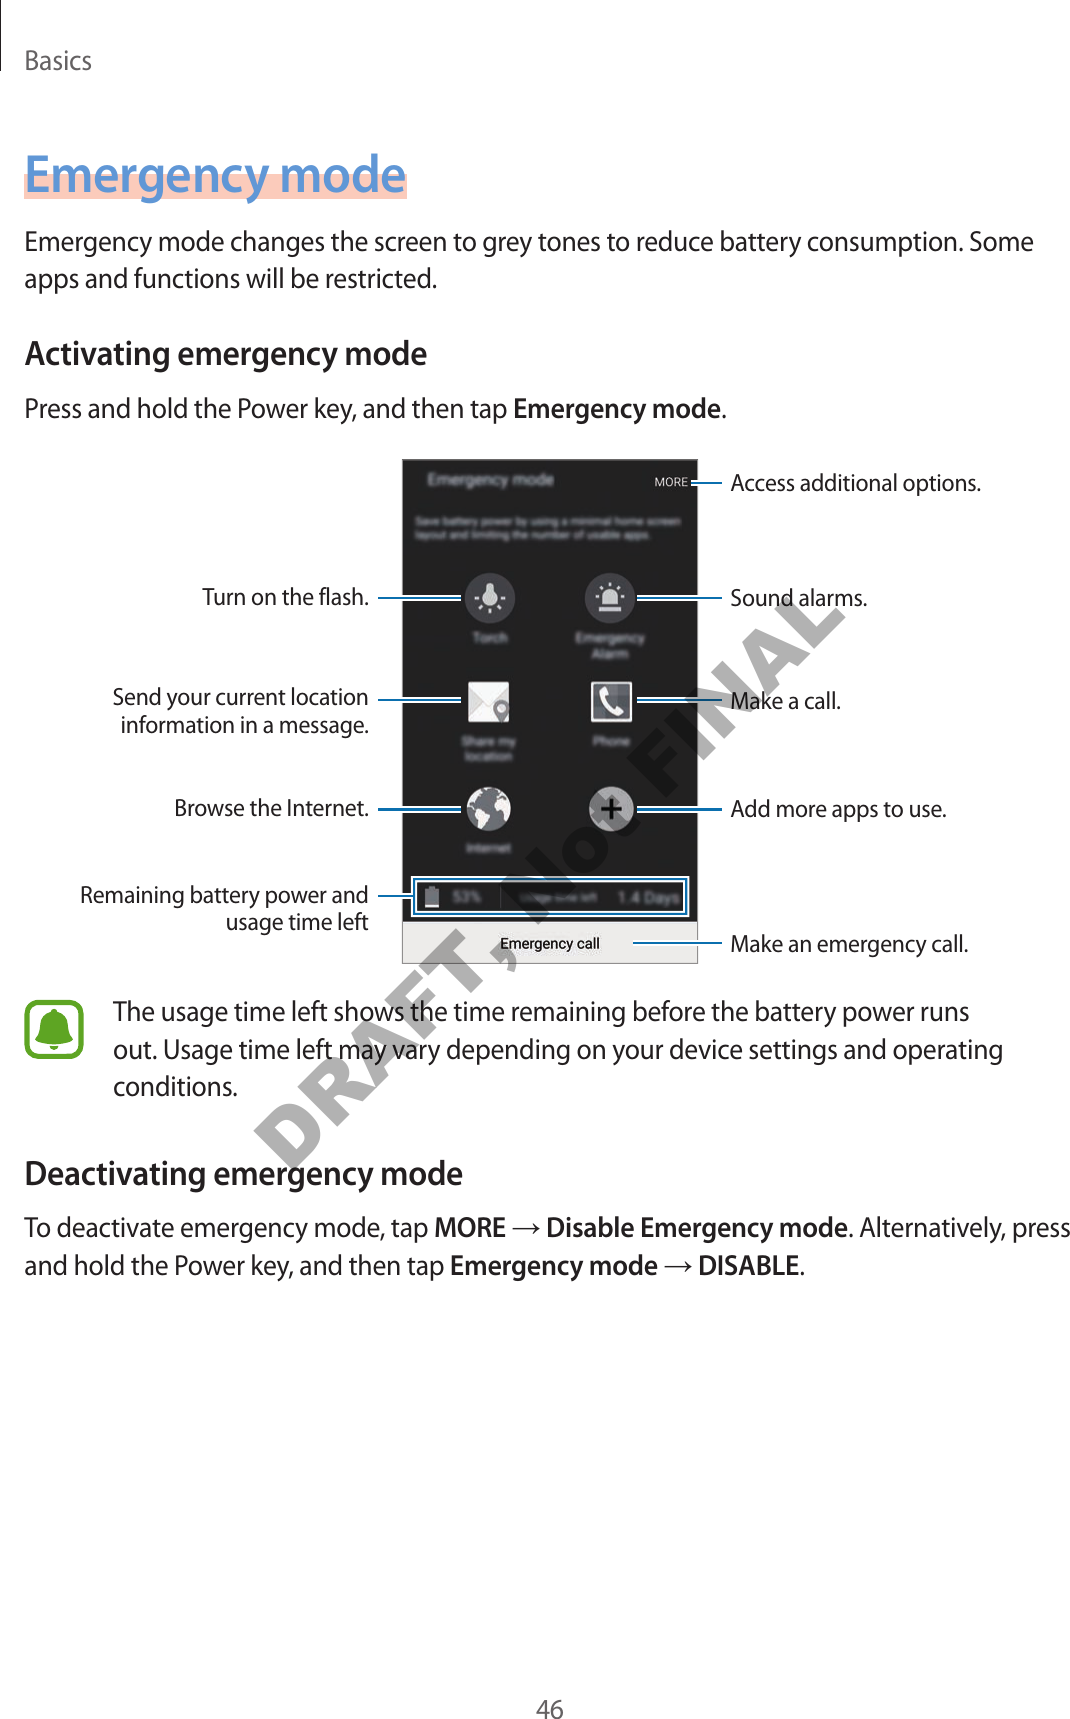 Basics46Emergency modeEmergency mode changes the screen to grey tones to reduce battery consumption. Some apps and functions will be restricted.Activating emergency modePress and hold the Power key, and then tap Emergency mode.Add more apps to use.Make an emergency call.Remaining battery power and usage time leftTurn on the flash.Make a call.Send your current location information in a message.Browse the Internet.Access additional options.Sound alarms.The usage time left shows the time remaining before the battery power runs out. Usage time left may vary depending on your device settings and operating conditions.Deactivating emergency modeTo deactivate emergency mode, tap MORE  Disable Emergency mode. Alternatively, press and hold the Power key, and then tap Emergency mode  DISABLE.DRAFT, Not FINAL